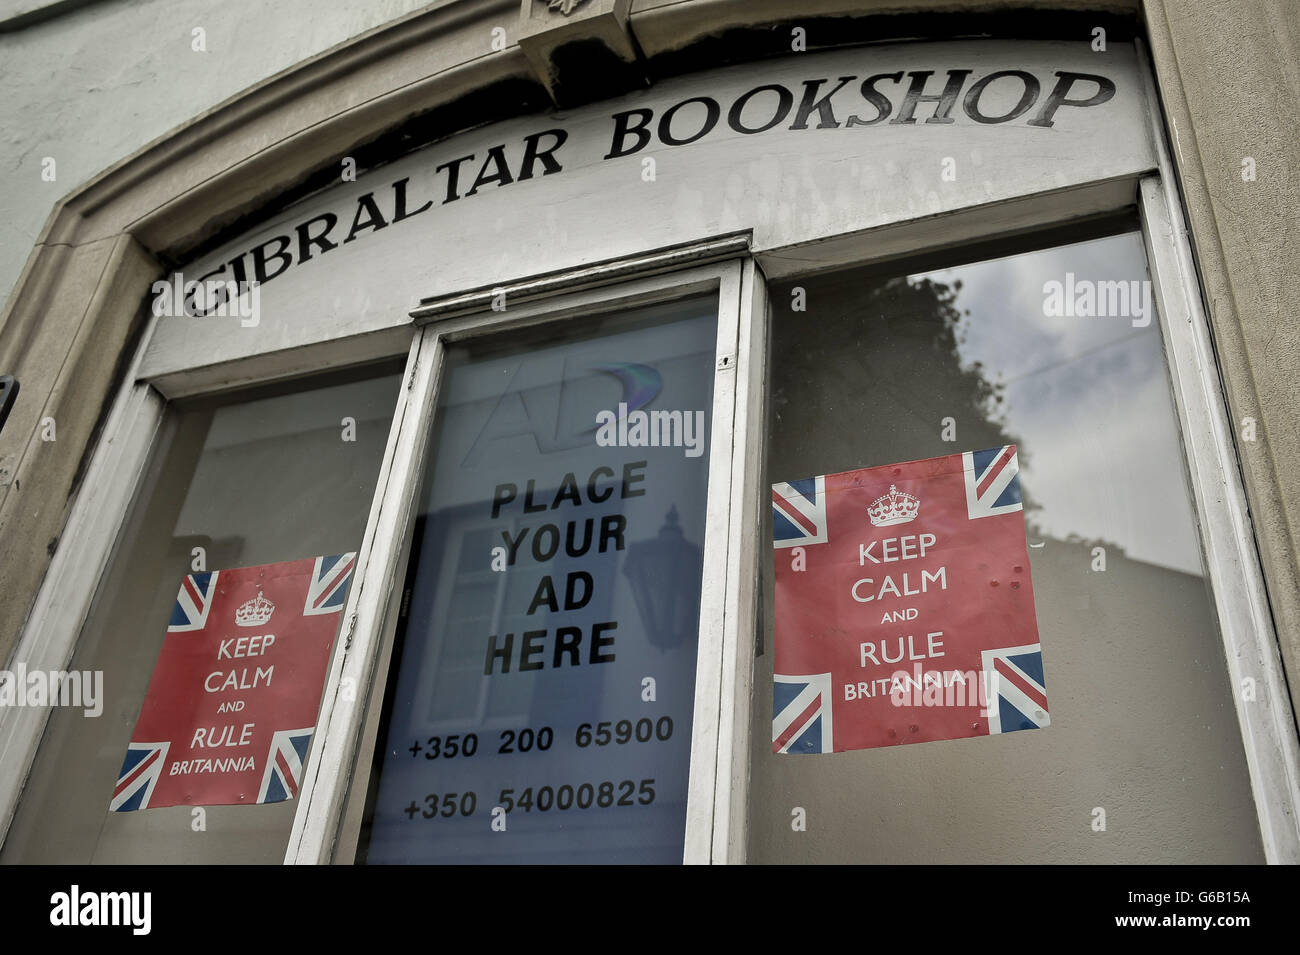 A view of 'Keep Calm and Rule Britannia' posters in the Gibraltar Bookshop window, Main Street, Gibraltar. Stock Photo